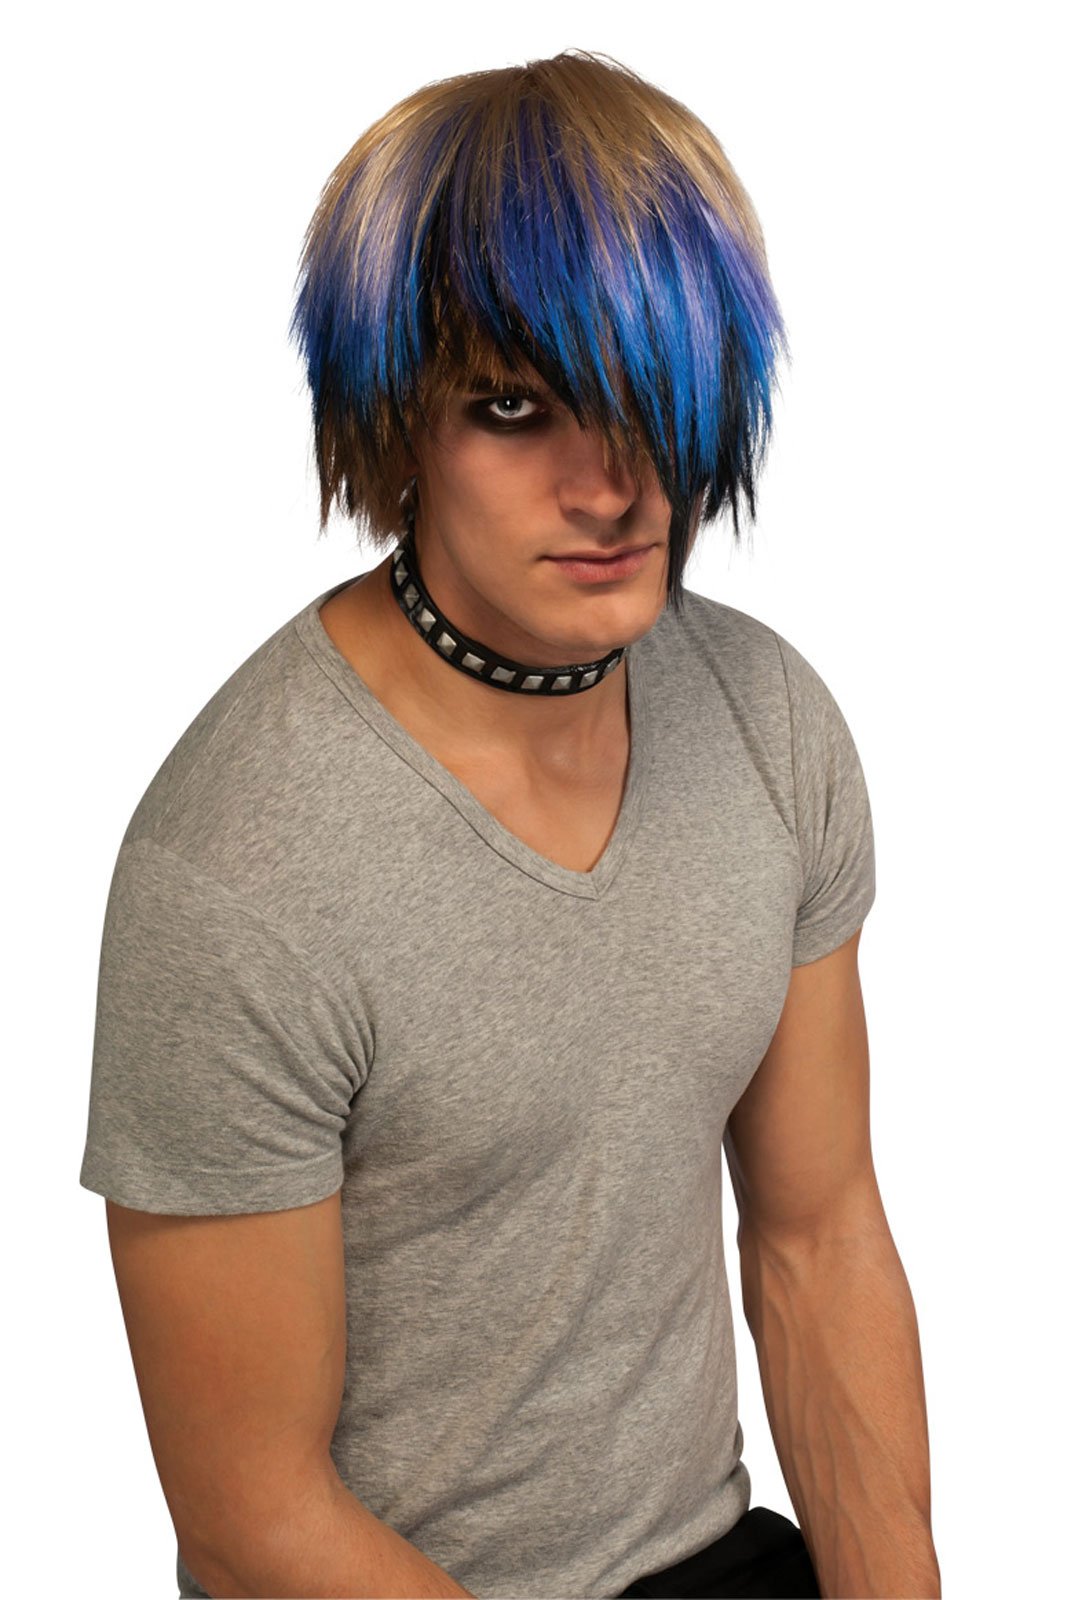 Male Pixie Adult Wig